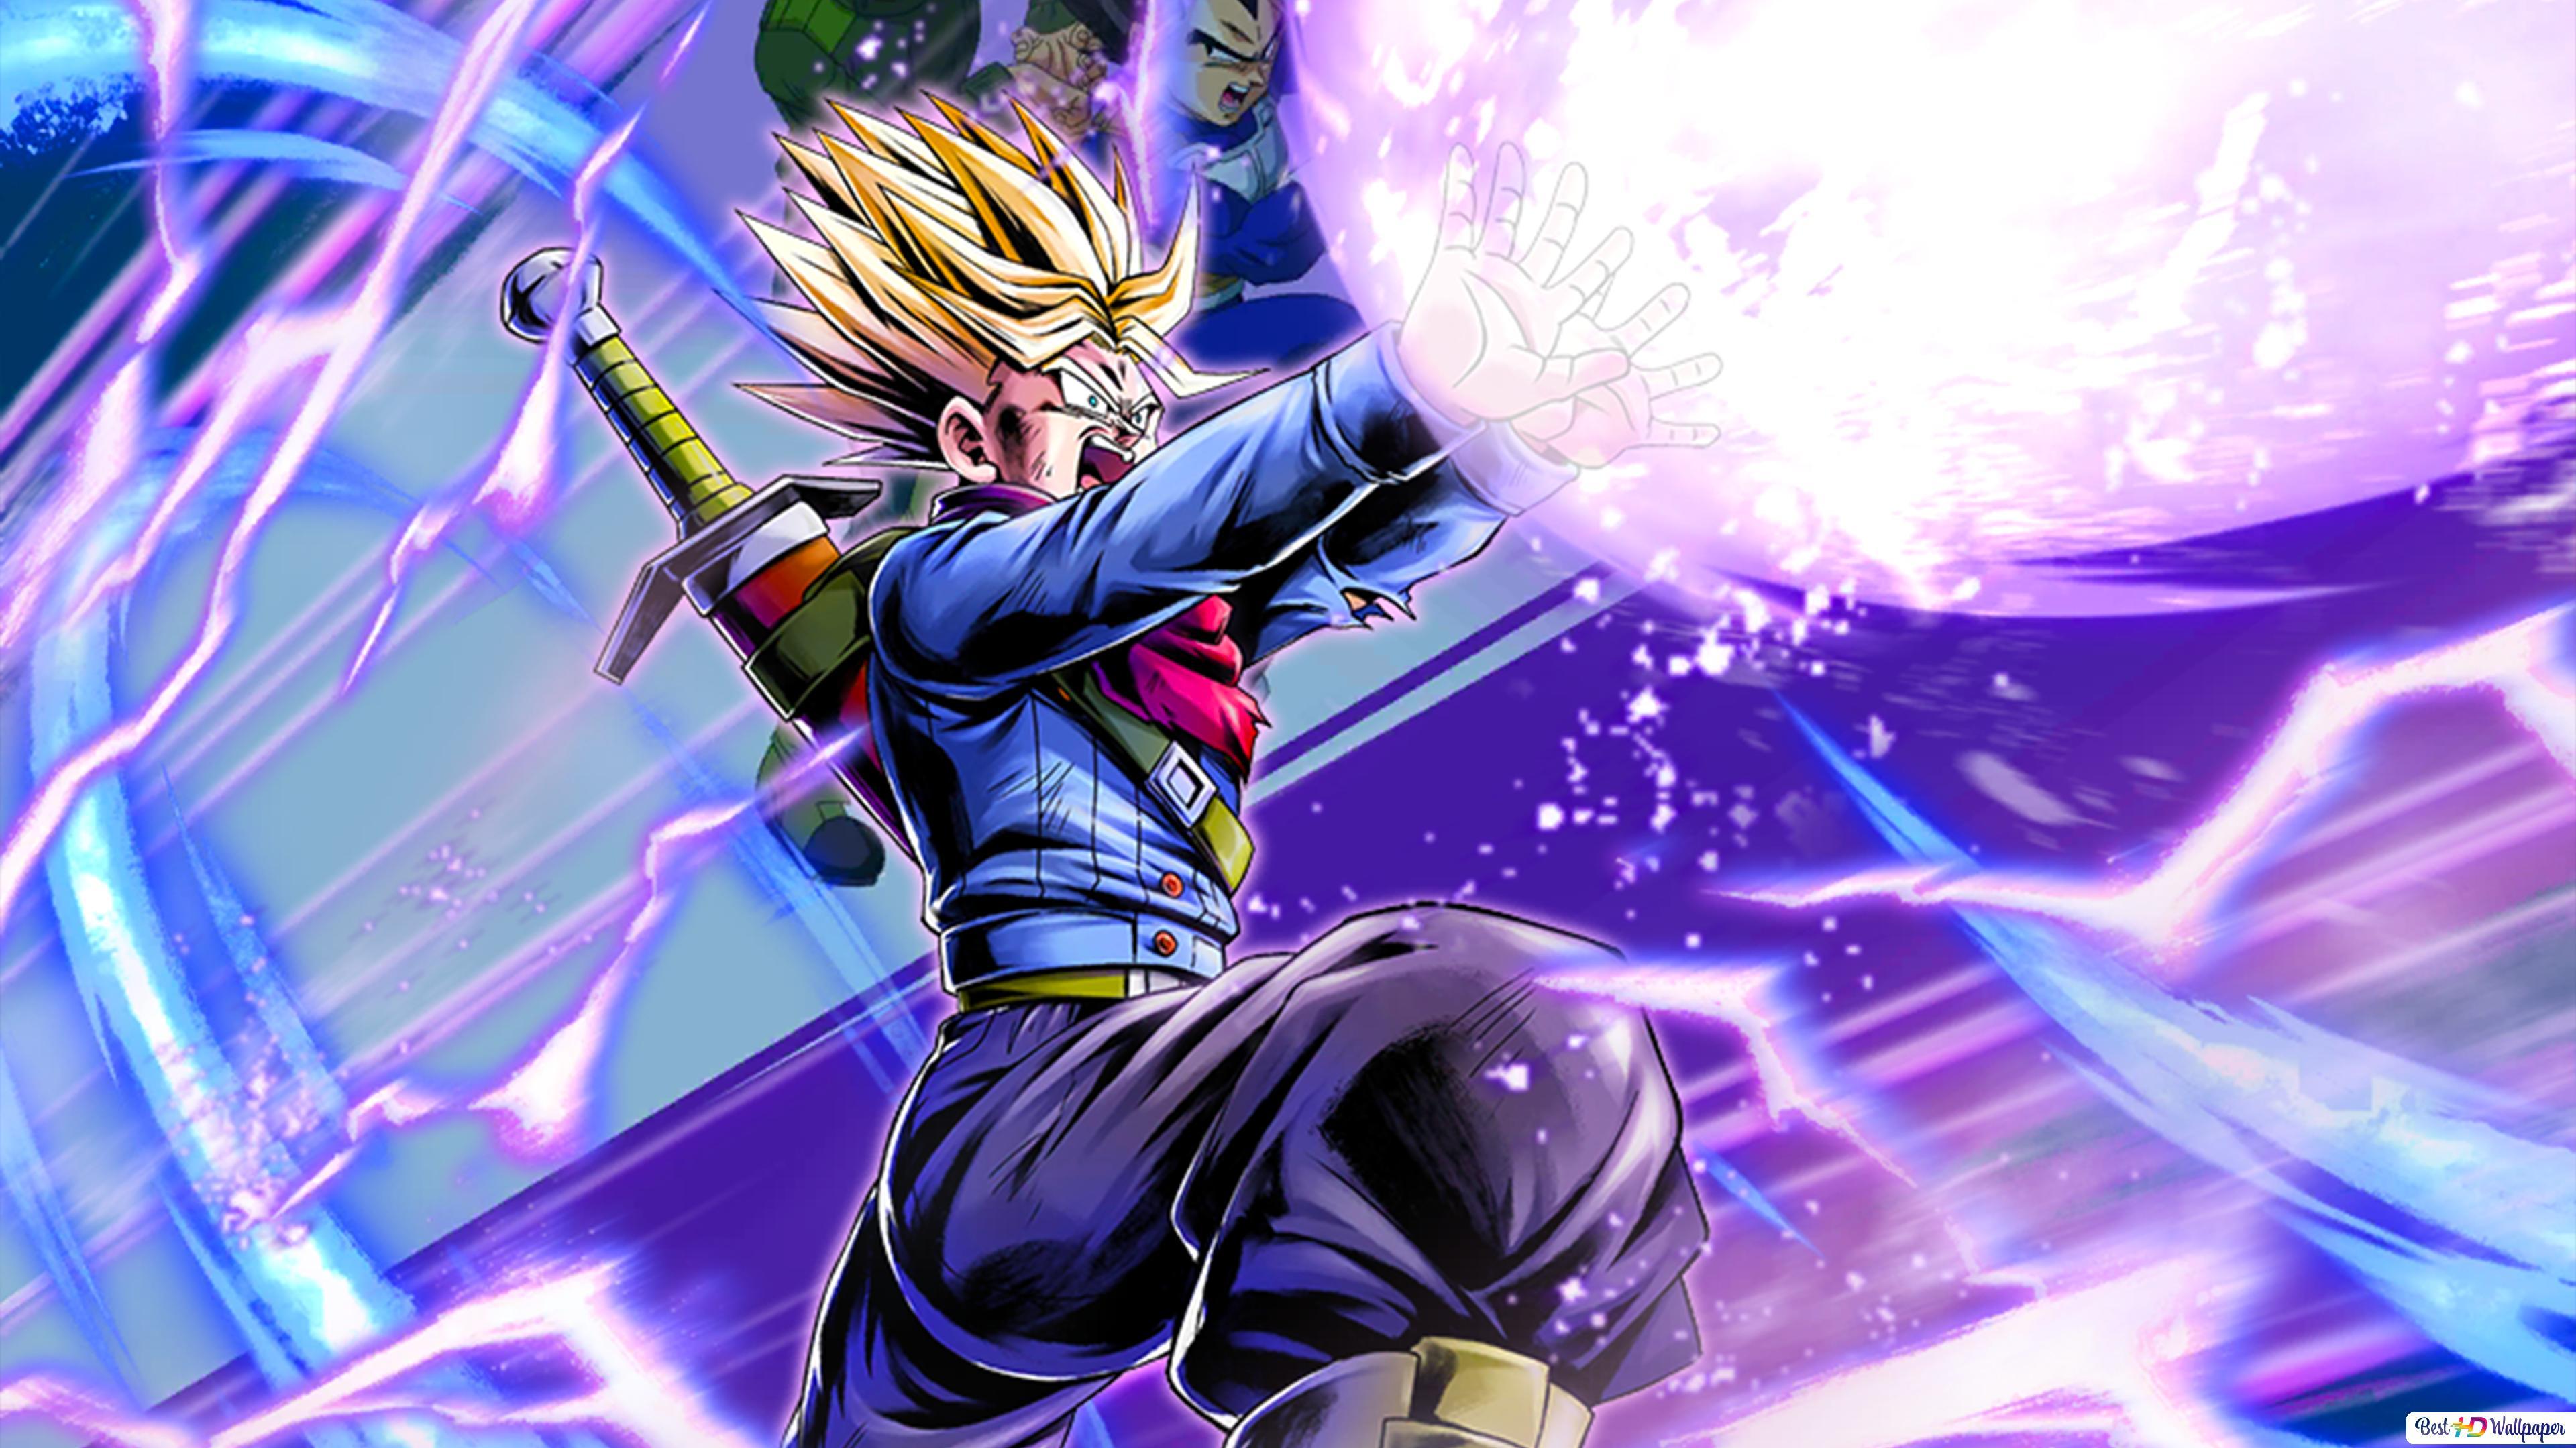 Fun fact Trunks Rage has 3 different names in this game r